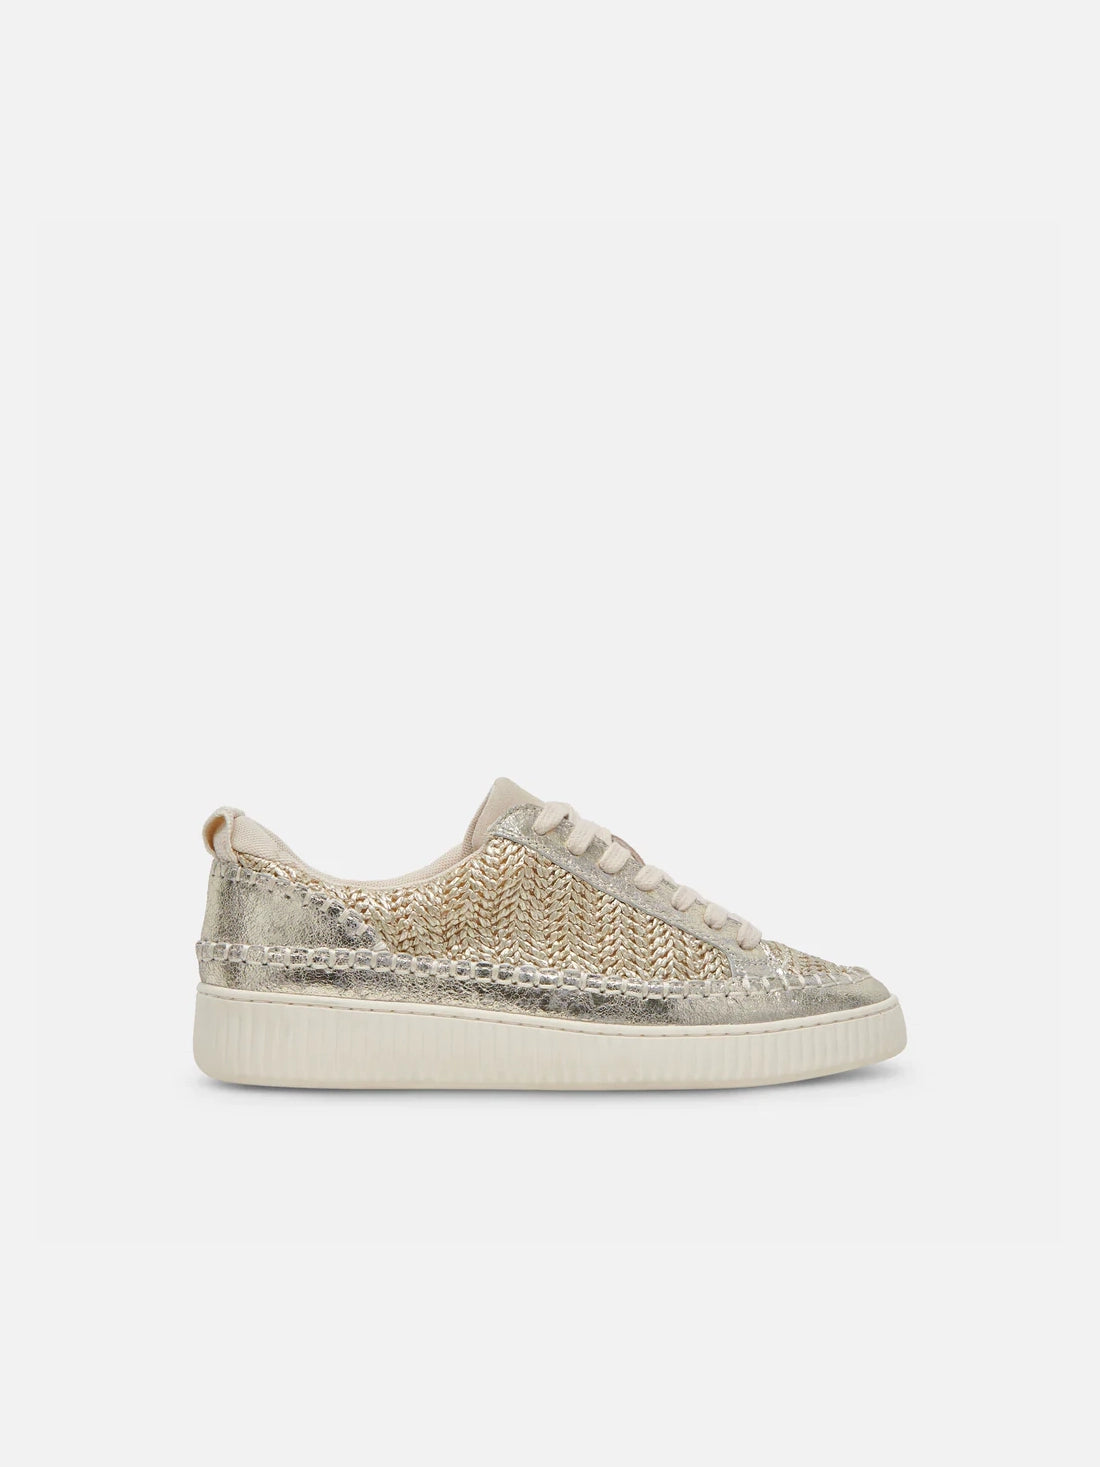 dolce vita nicona sneakers in gold woven